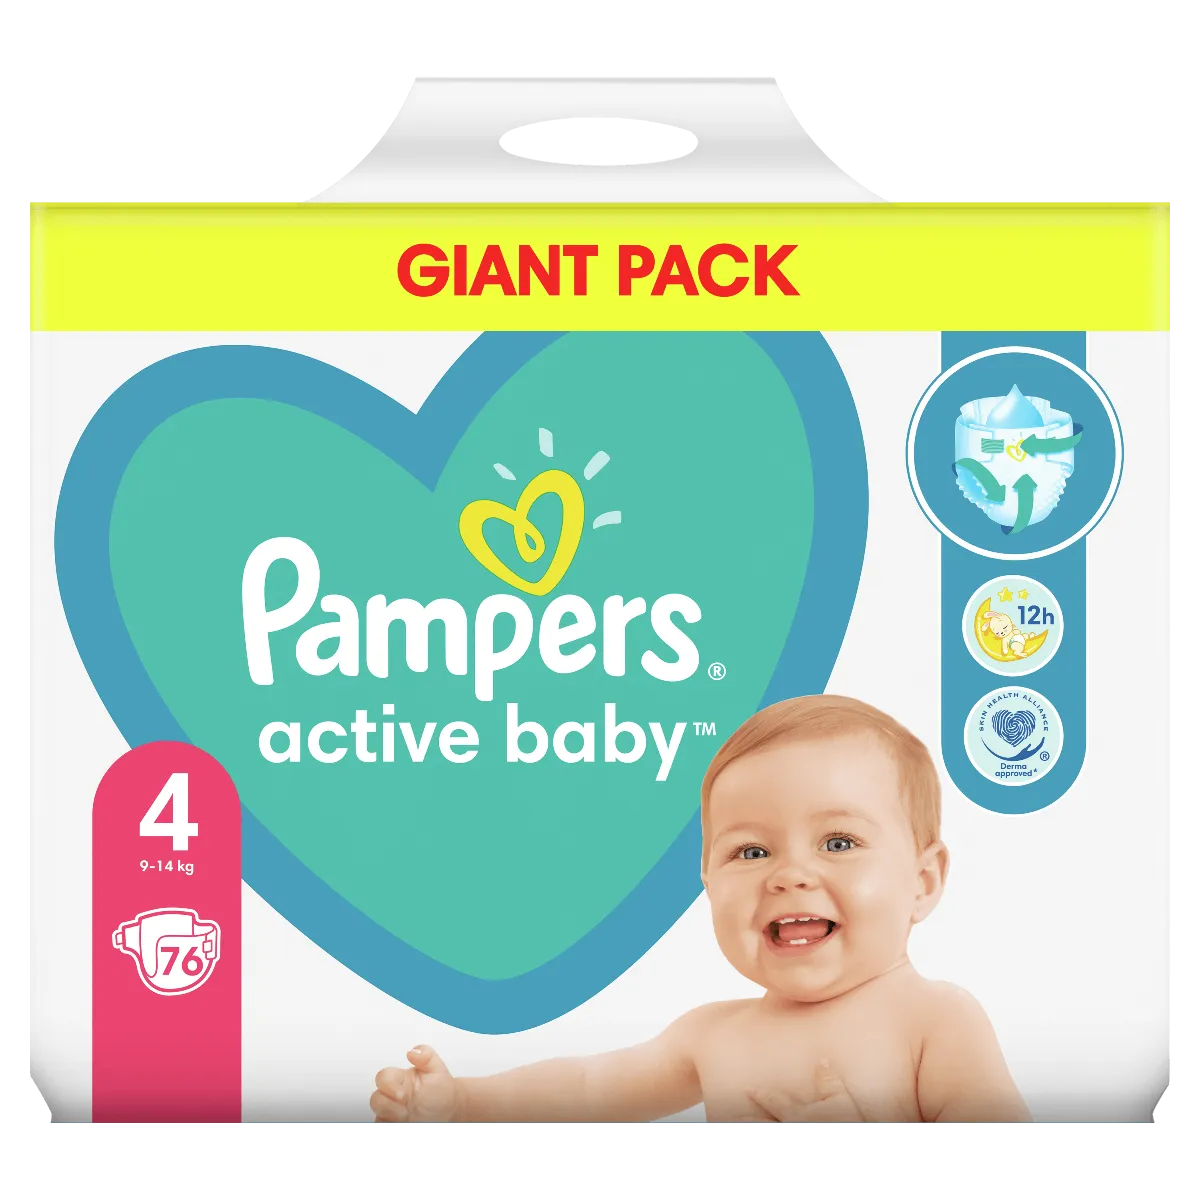 chust pampers new baby sens 54szt